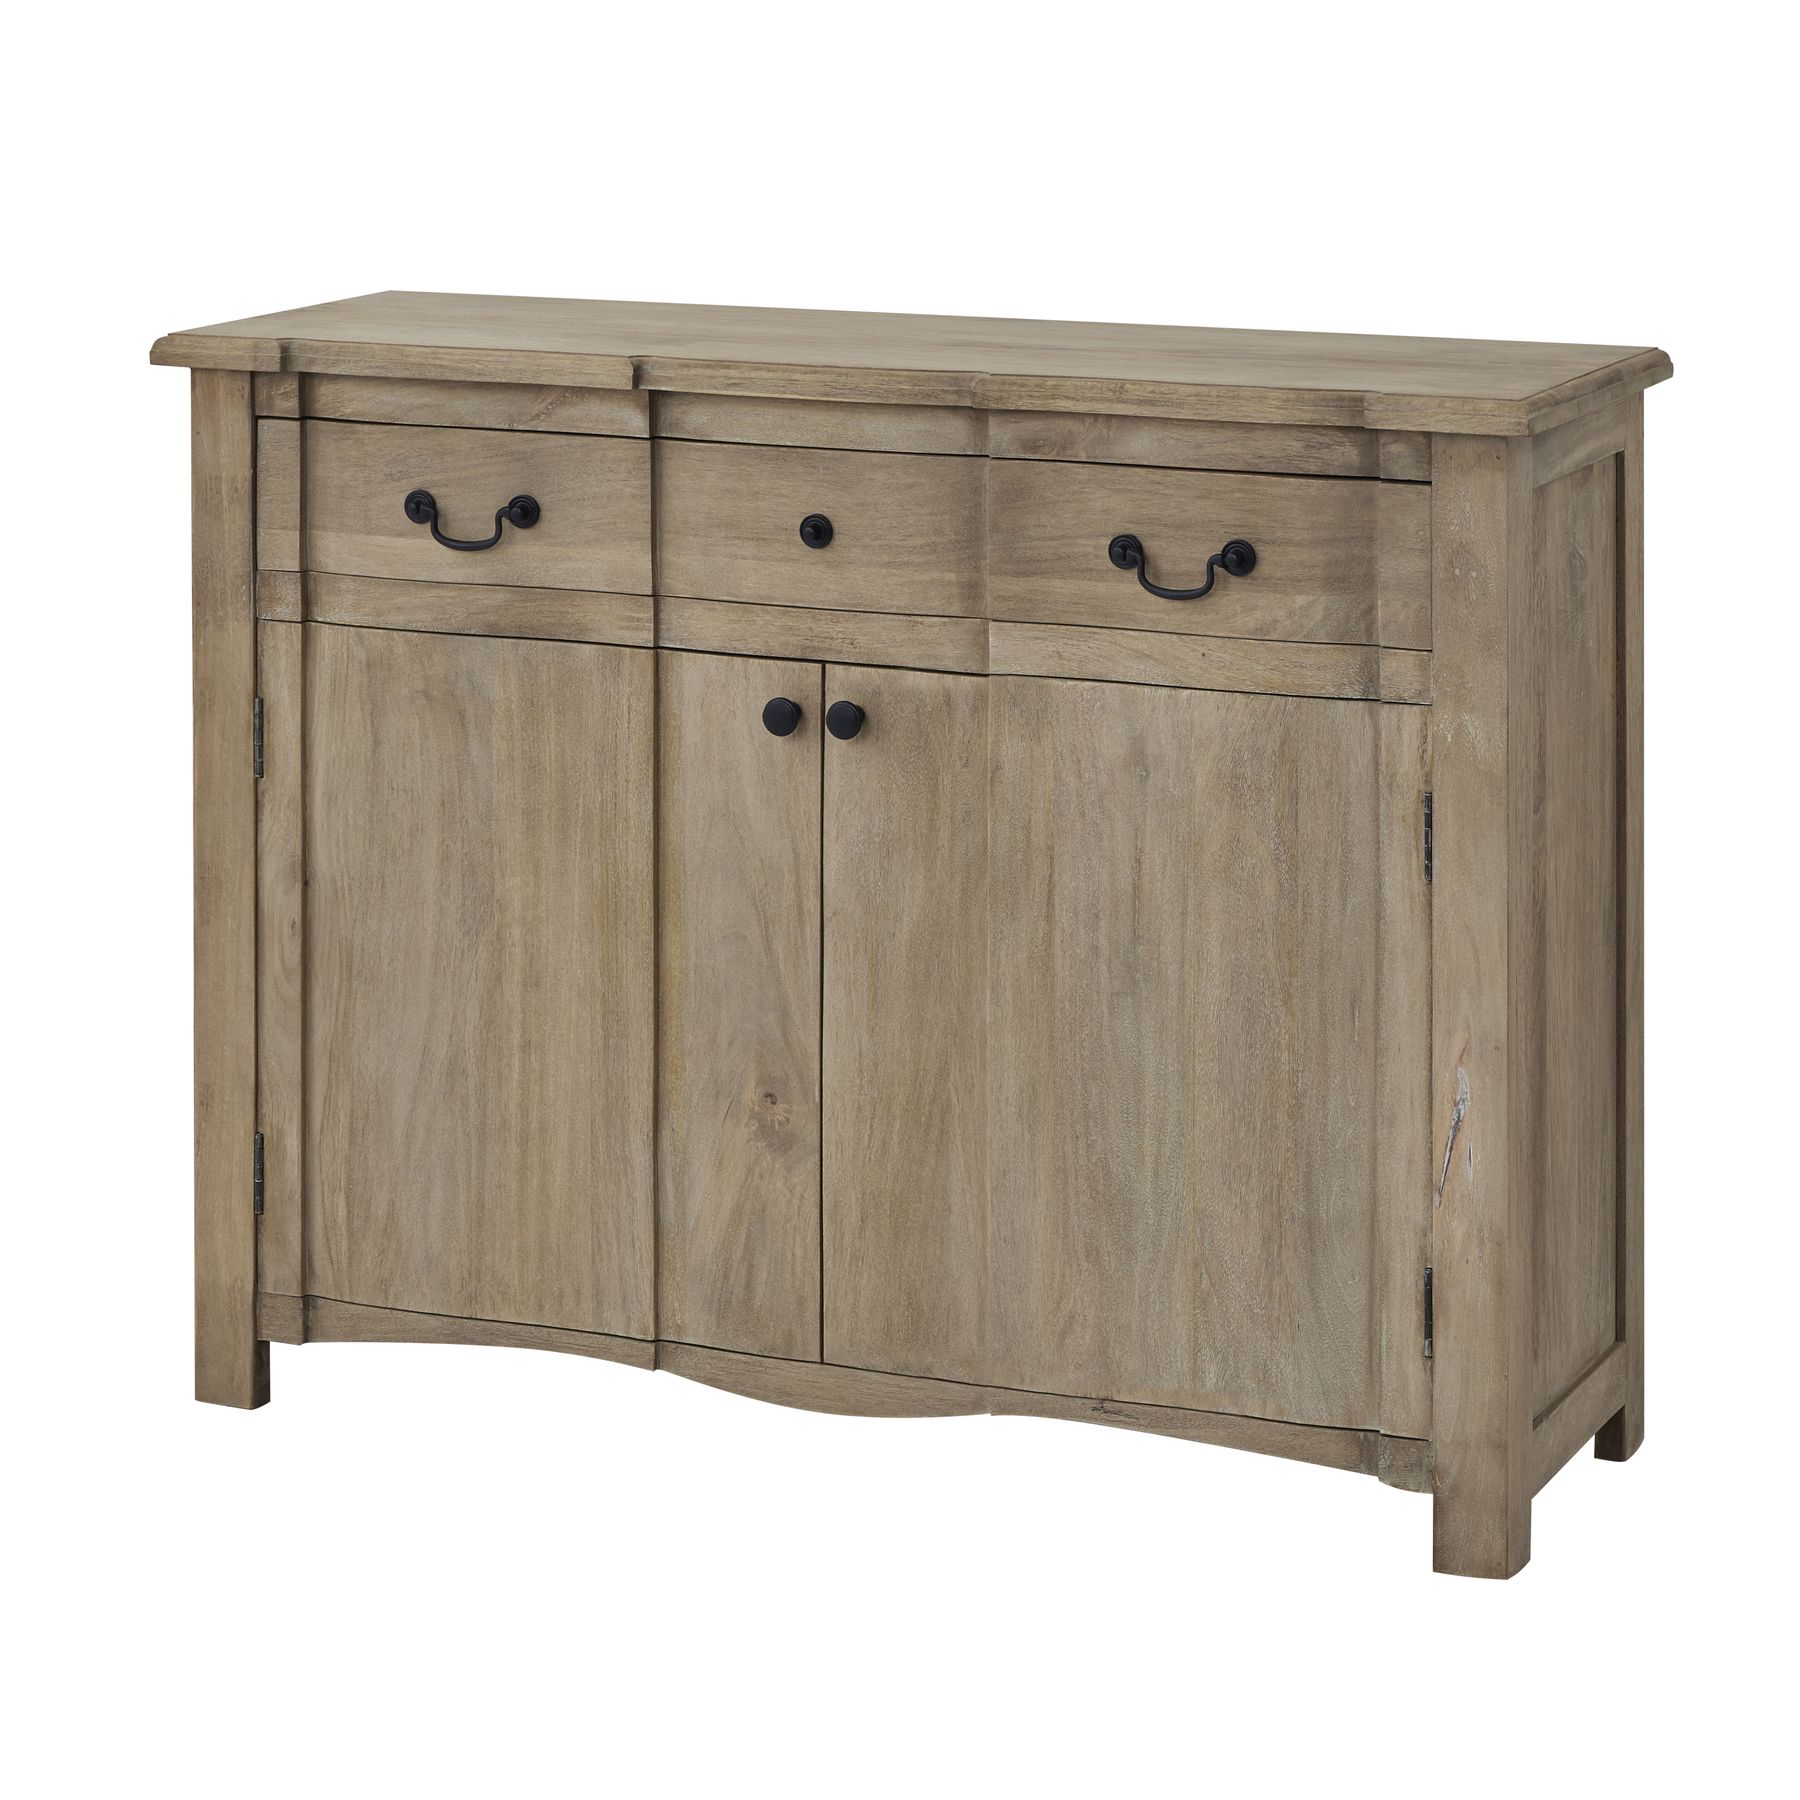 Copgrove Collection 1 Drawer 2 Door Sideboard - Image 1